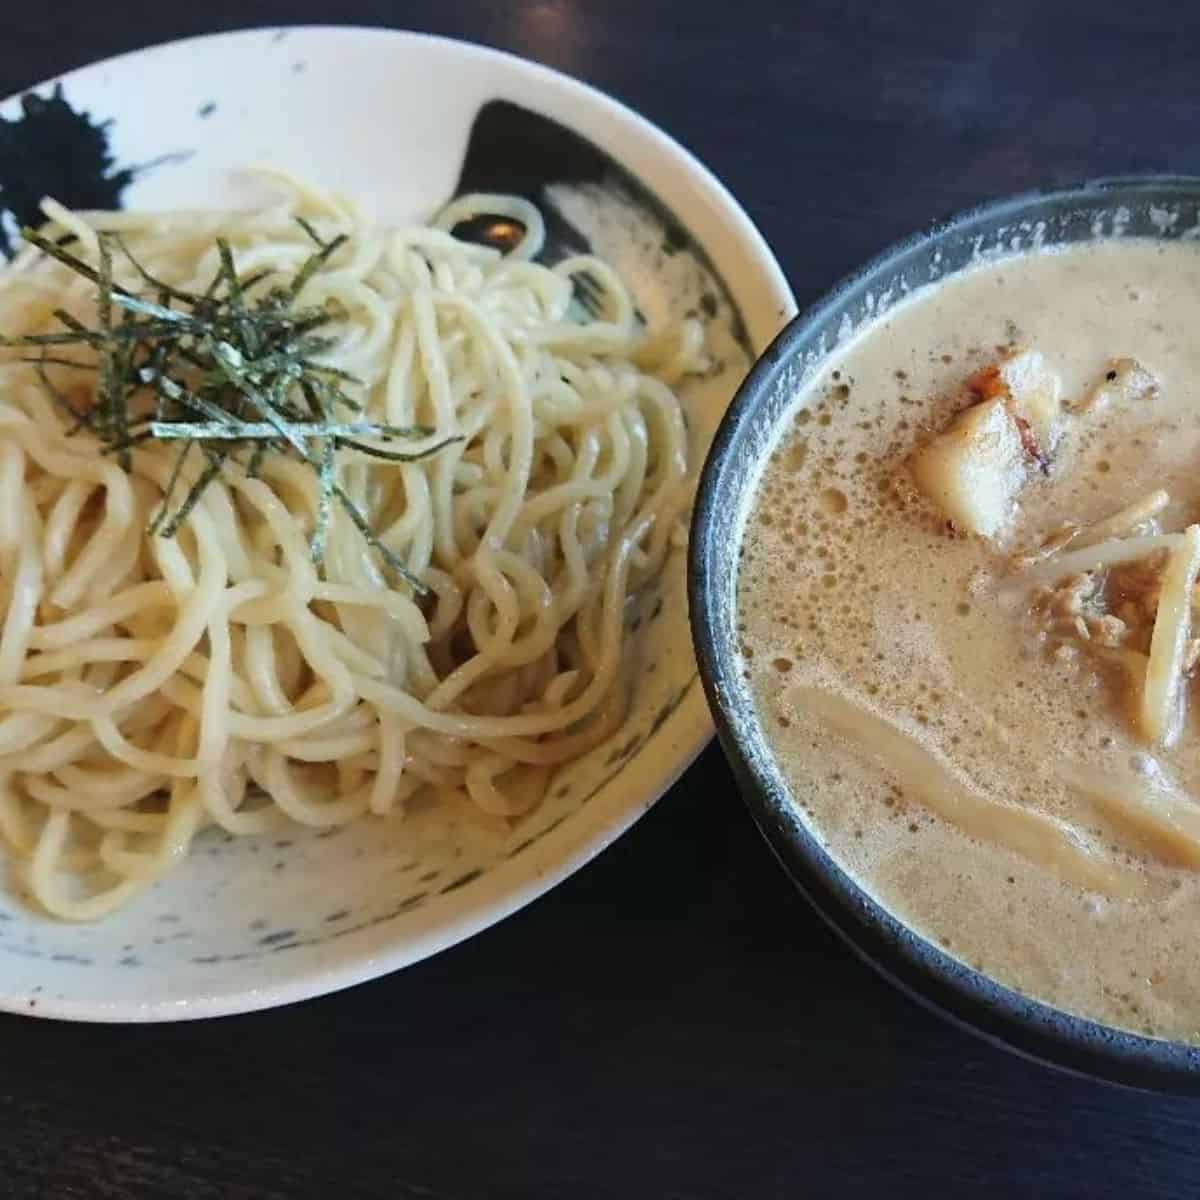 Japanese dish topped with seaweeds and a creamy broth